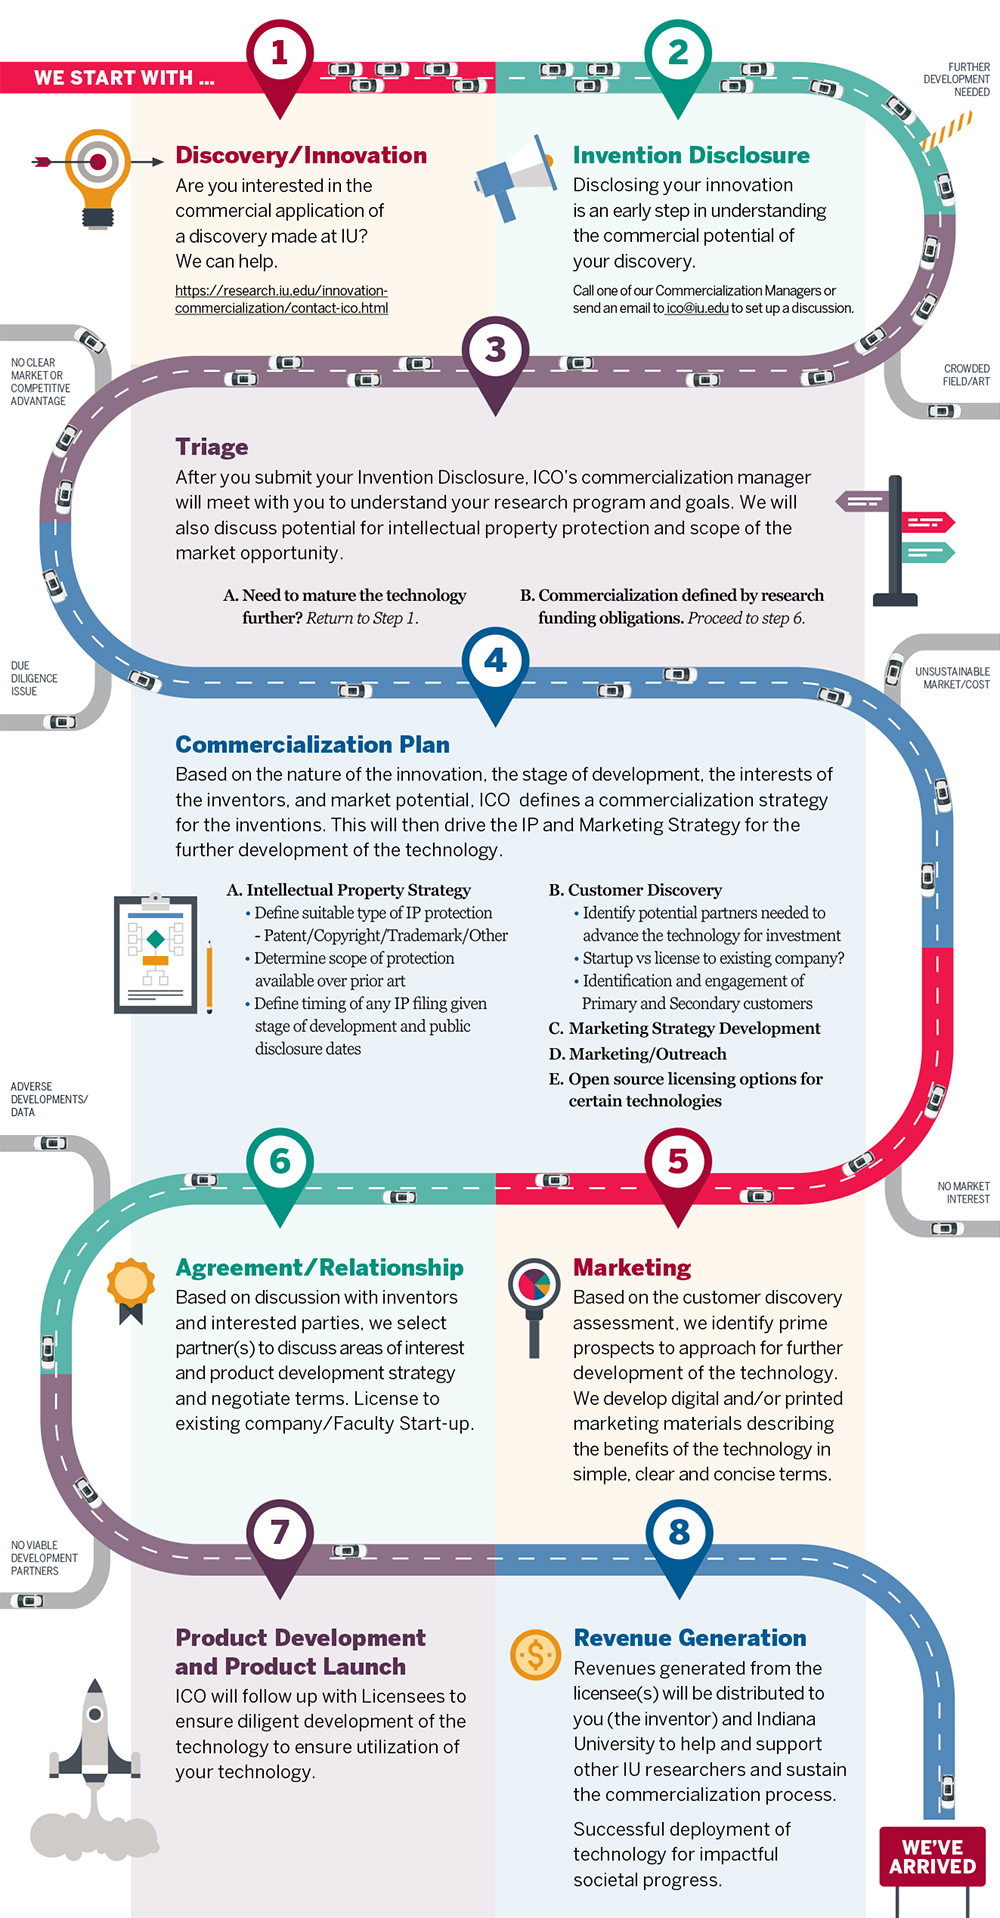 An infographic roadmap about navigating the various steps related to the commercialization process at IU